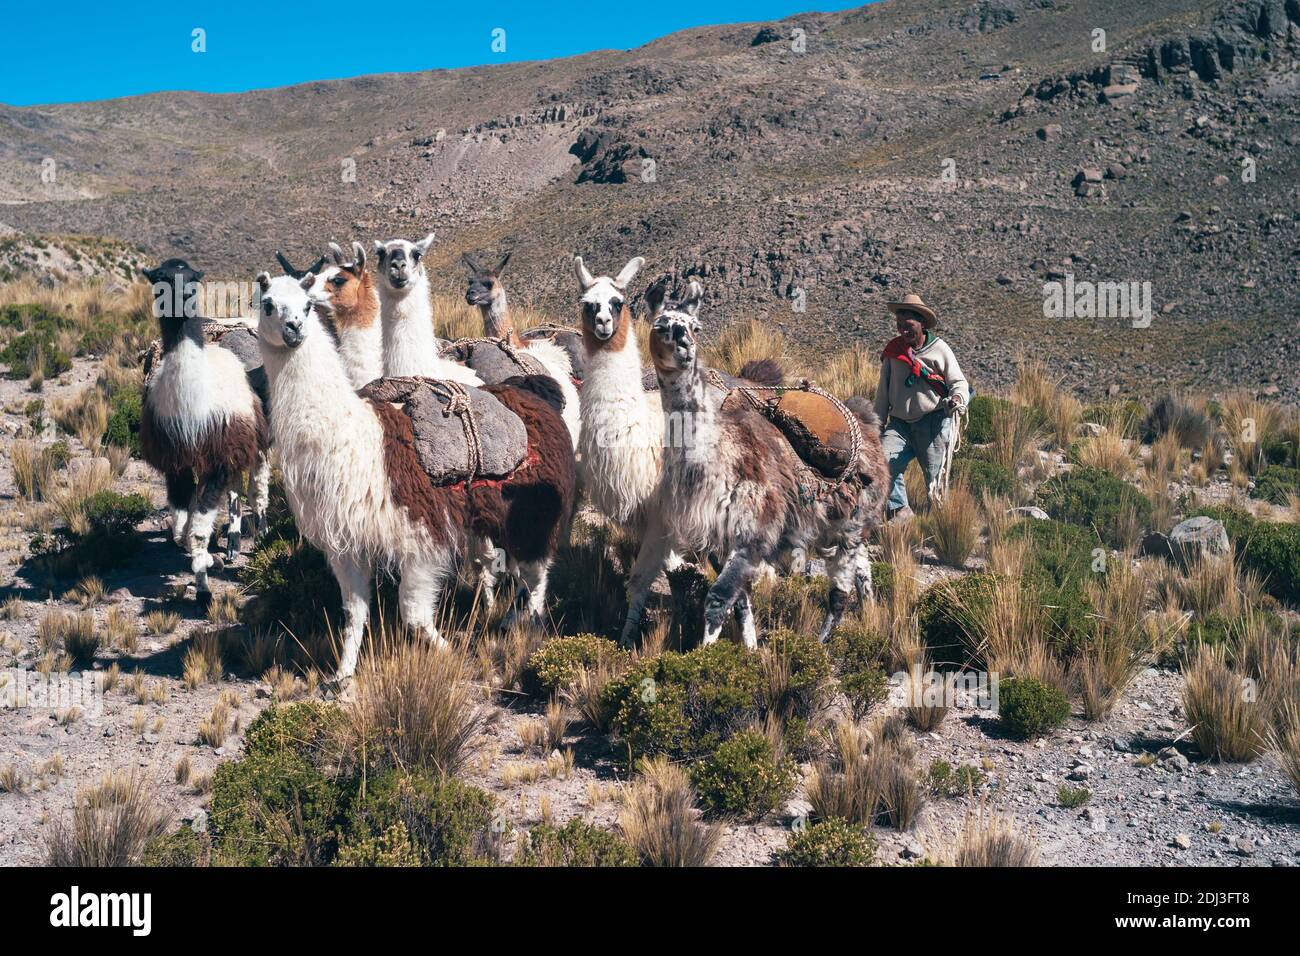 Chivay, Peru - July 21, 2010: Andean Herder with Llama Herd as Pack Animals, a Traditional Peruvian armer or Campesino Herding his Livestock and trans Stock Photo